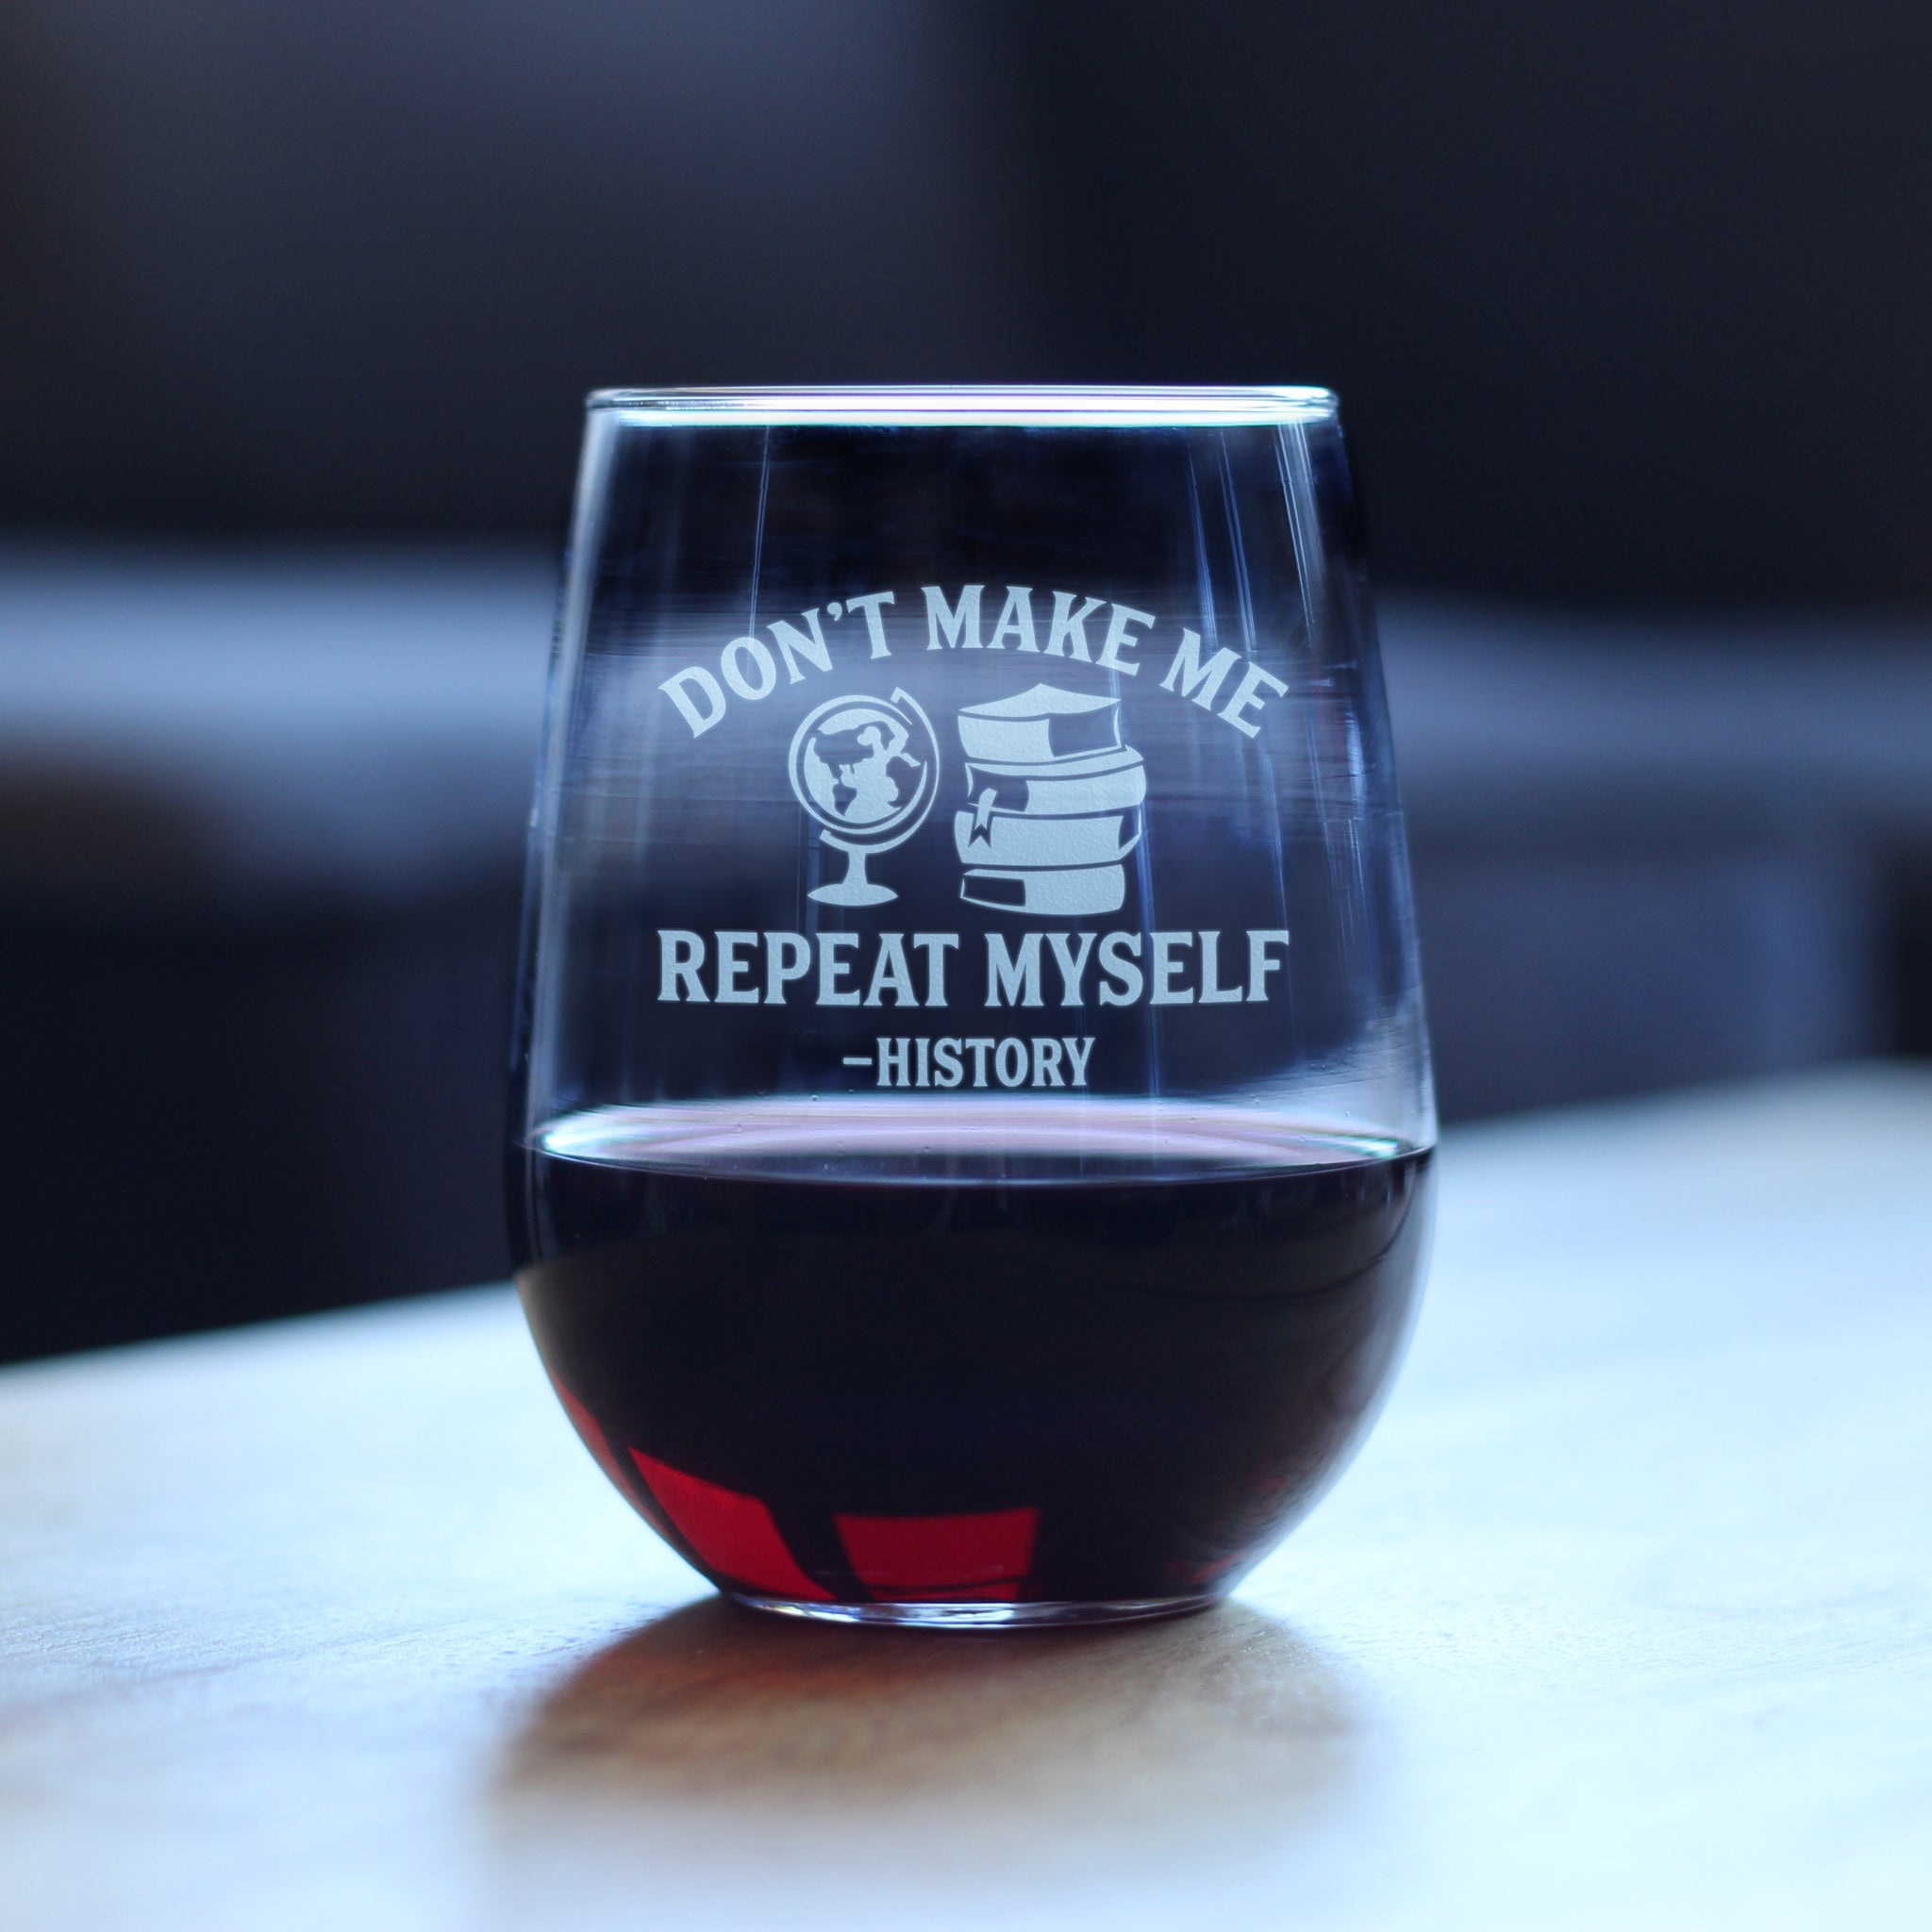 Funny Wine Glass But First Wine